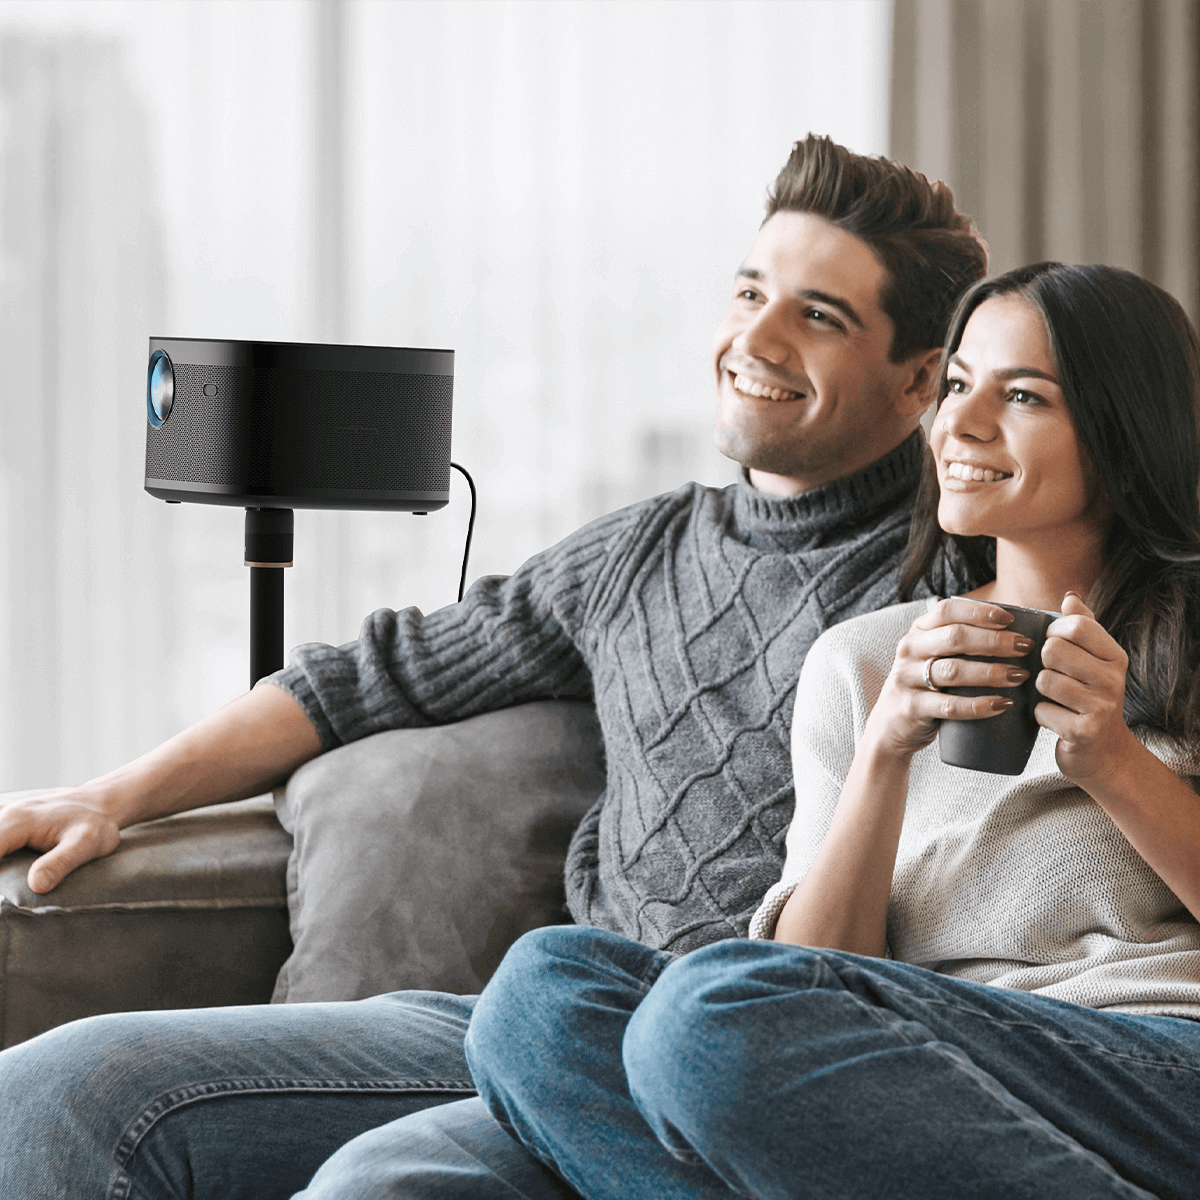 get an immersive movie experience with your lover in living room through HORIZON Pro 4K projector